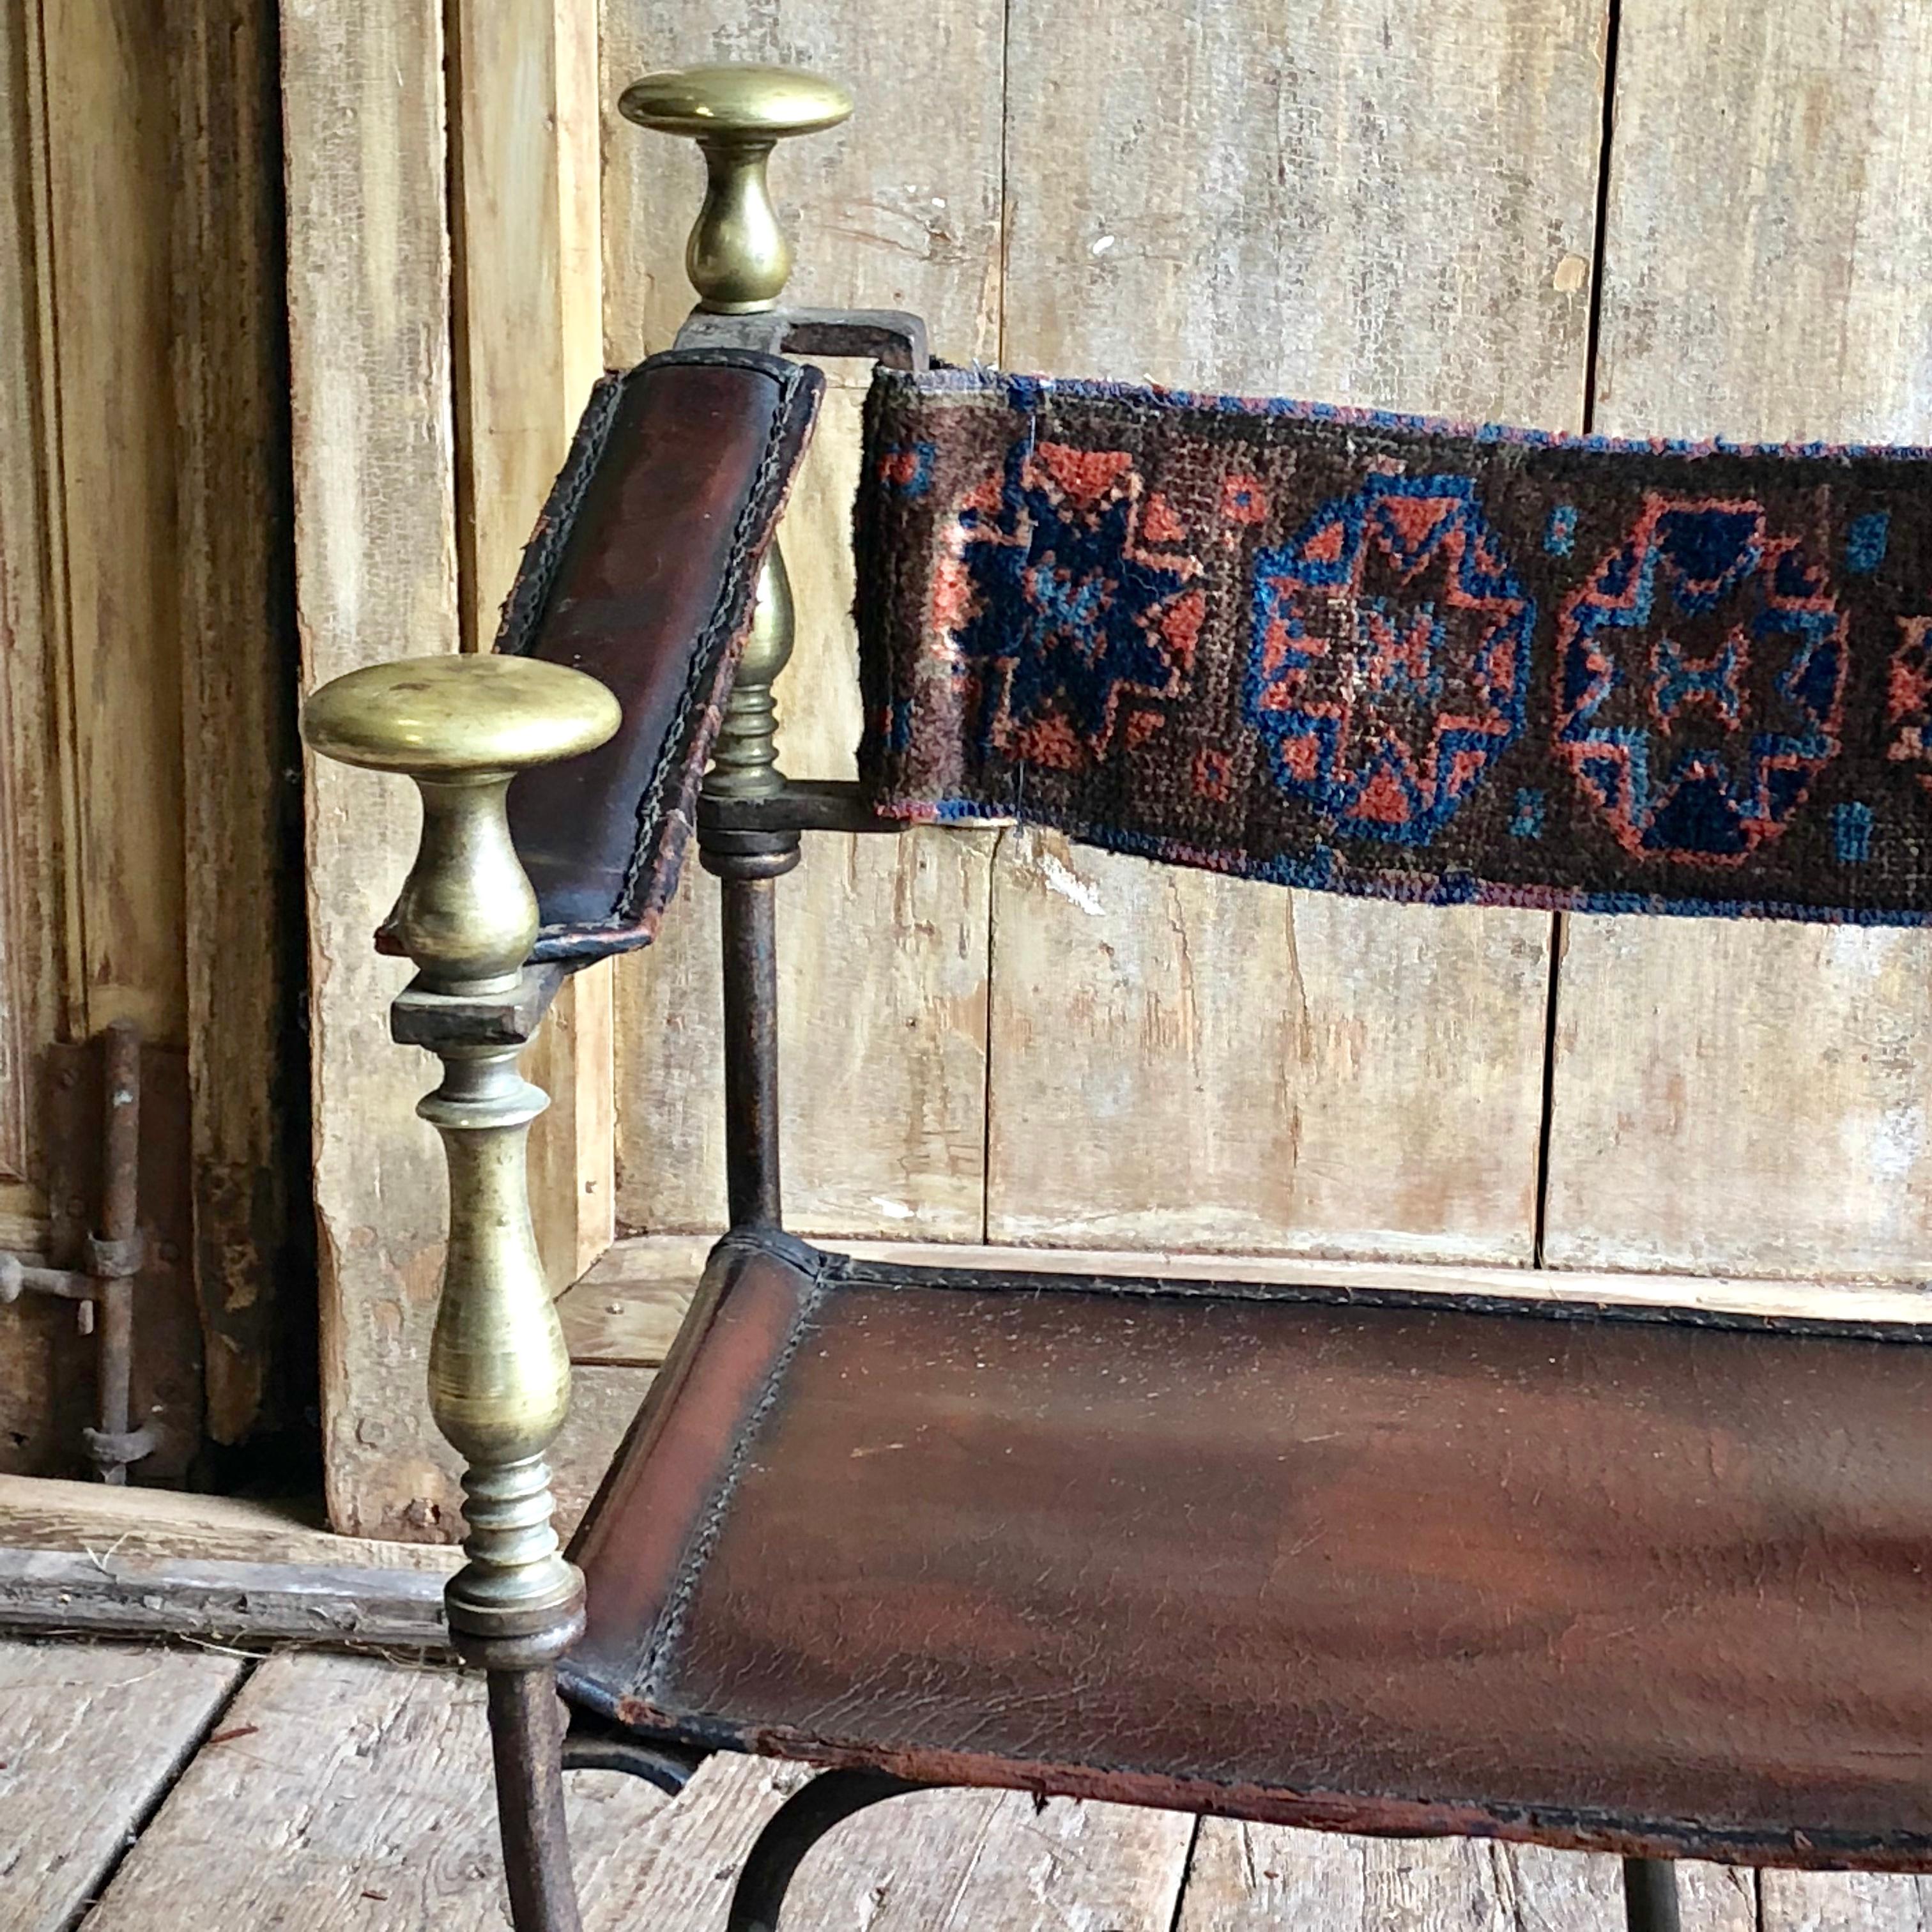 An antique Spanish or Italian Savonarola chair in wrought iron with brass accents, 19th Century.
Handstitched leather seat and arm rests with a tapestry backrest. The chair folds for transport. Traces of older gilded finish on iron. Lots of